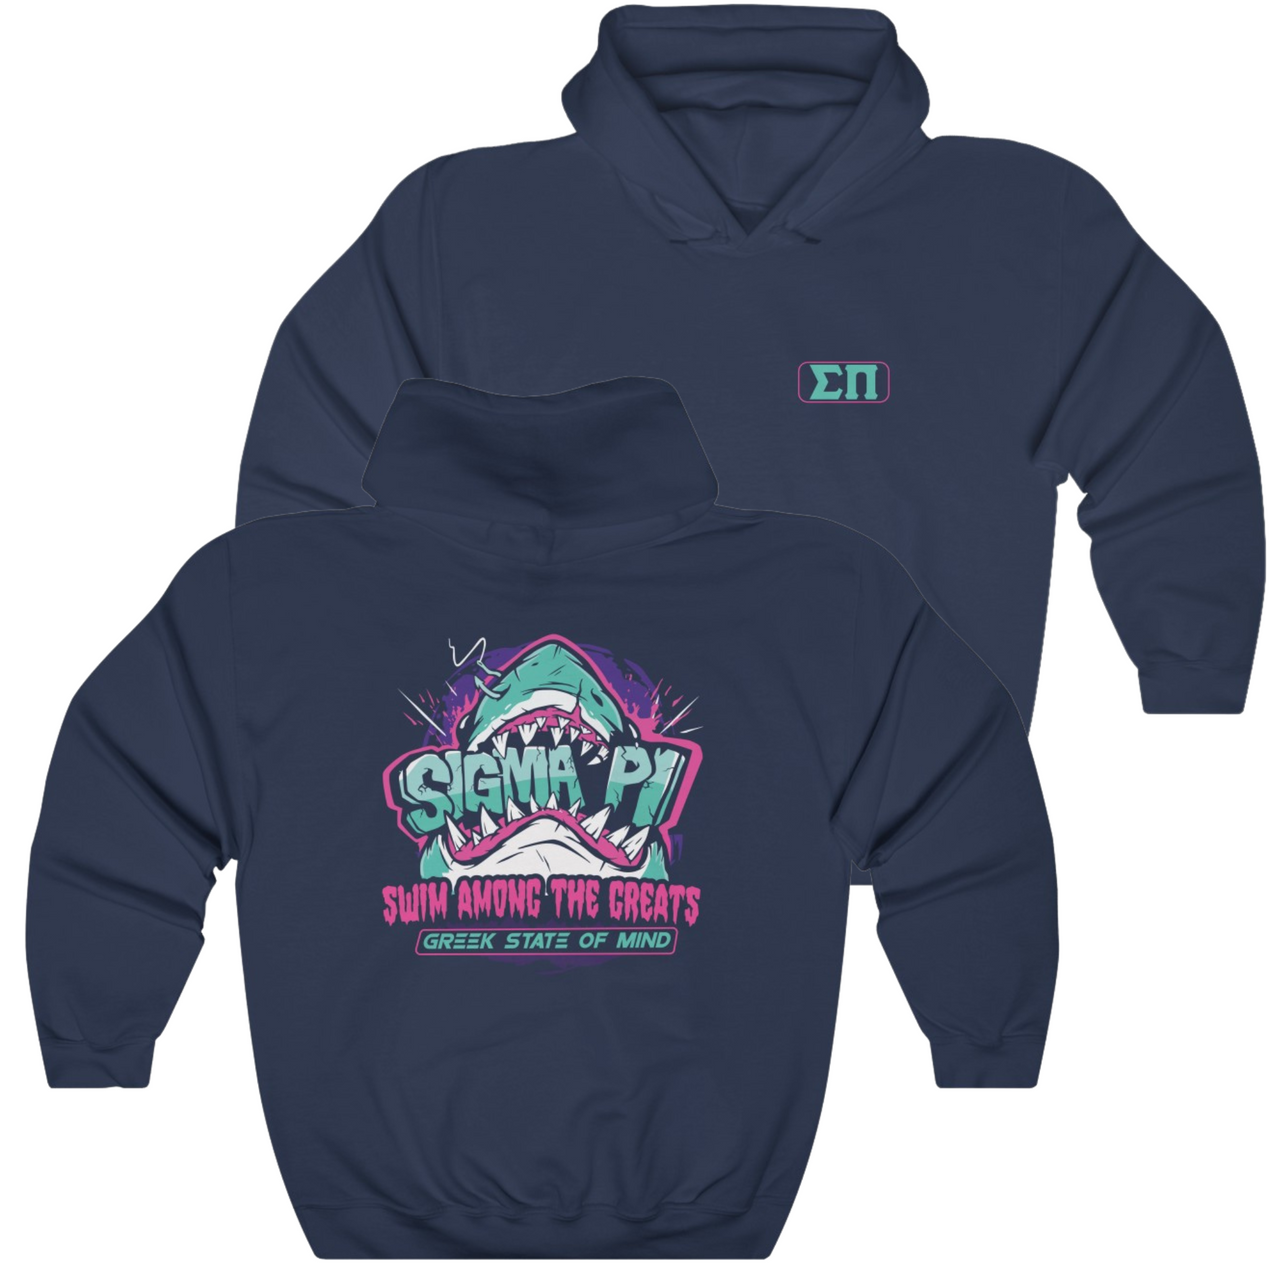 Navy Sigma Pi Graphic Hoodie | The Deep End | Sigma Pi Apparel and Merchandise 